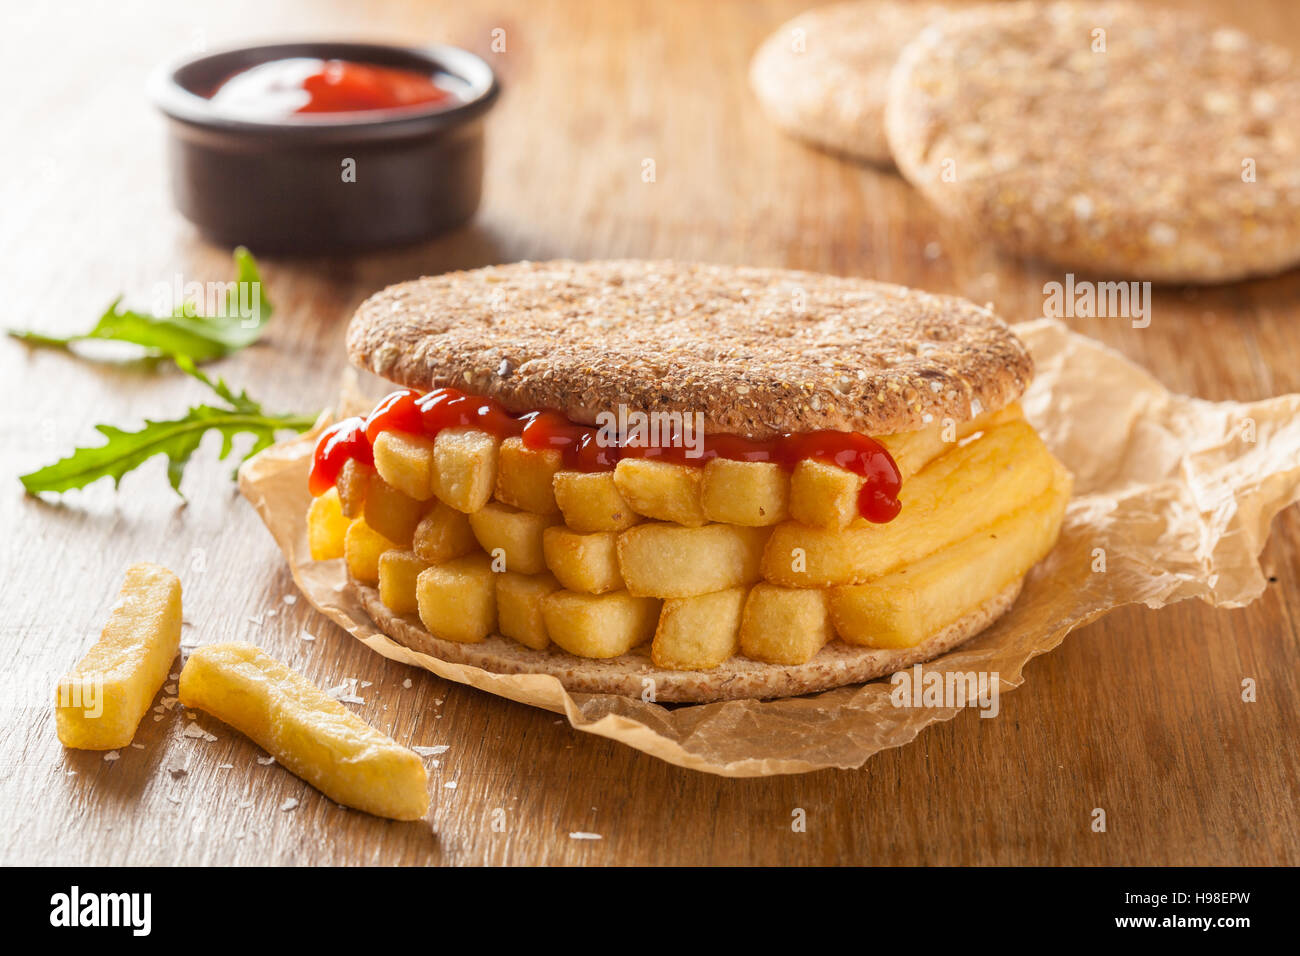 Chip Butty sandwich with potato chips or fries and ketchup Stock Photo